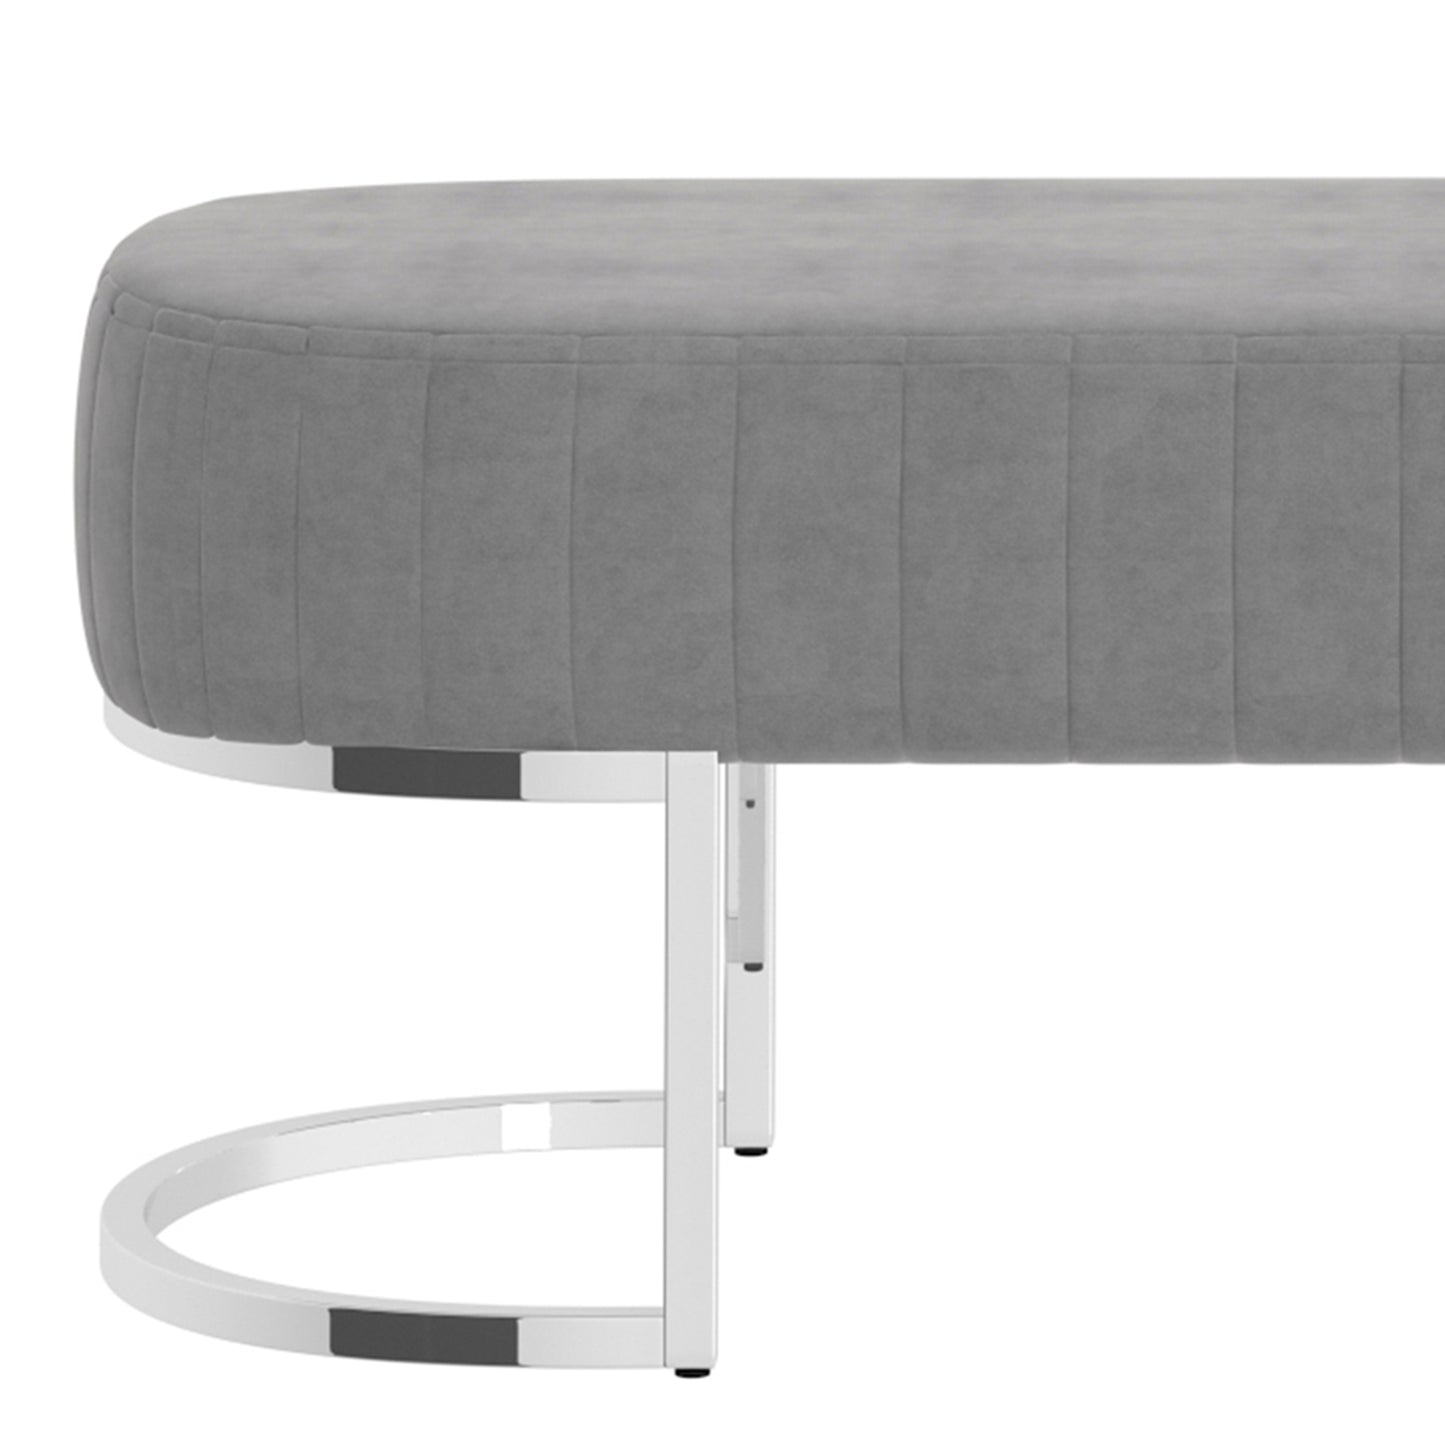 Zamora Bench in Grey and Silver